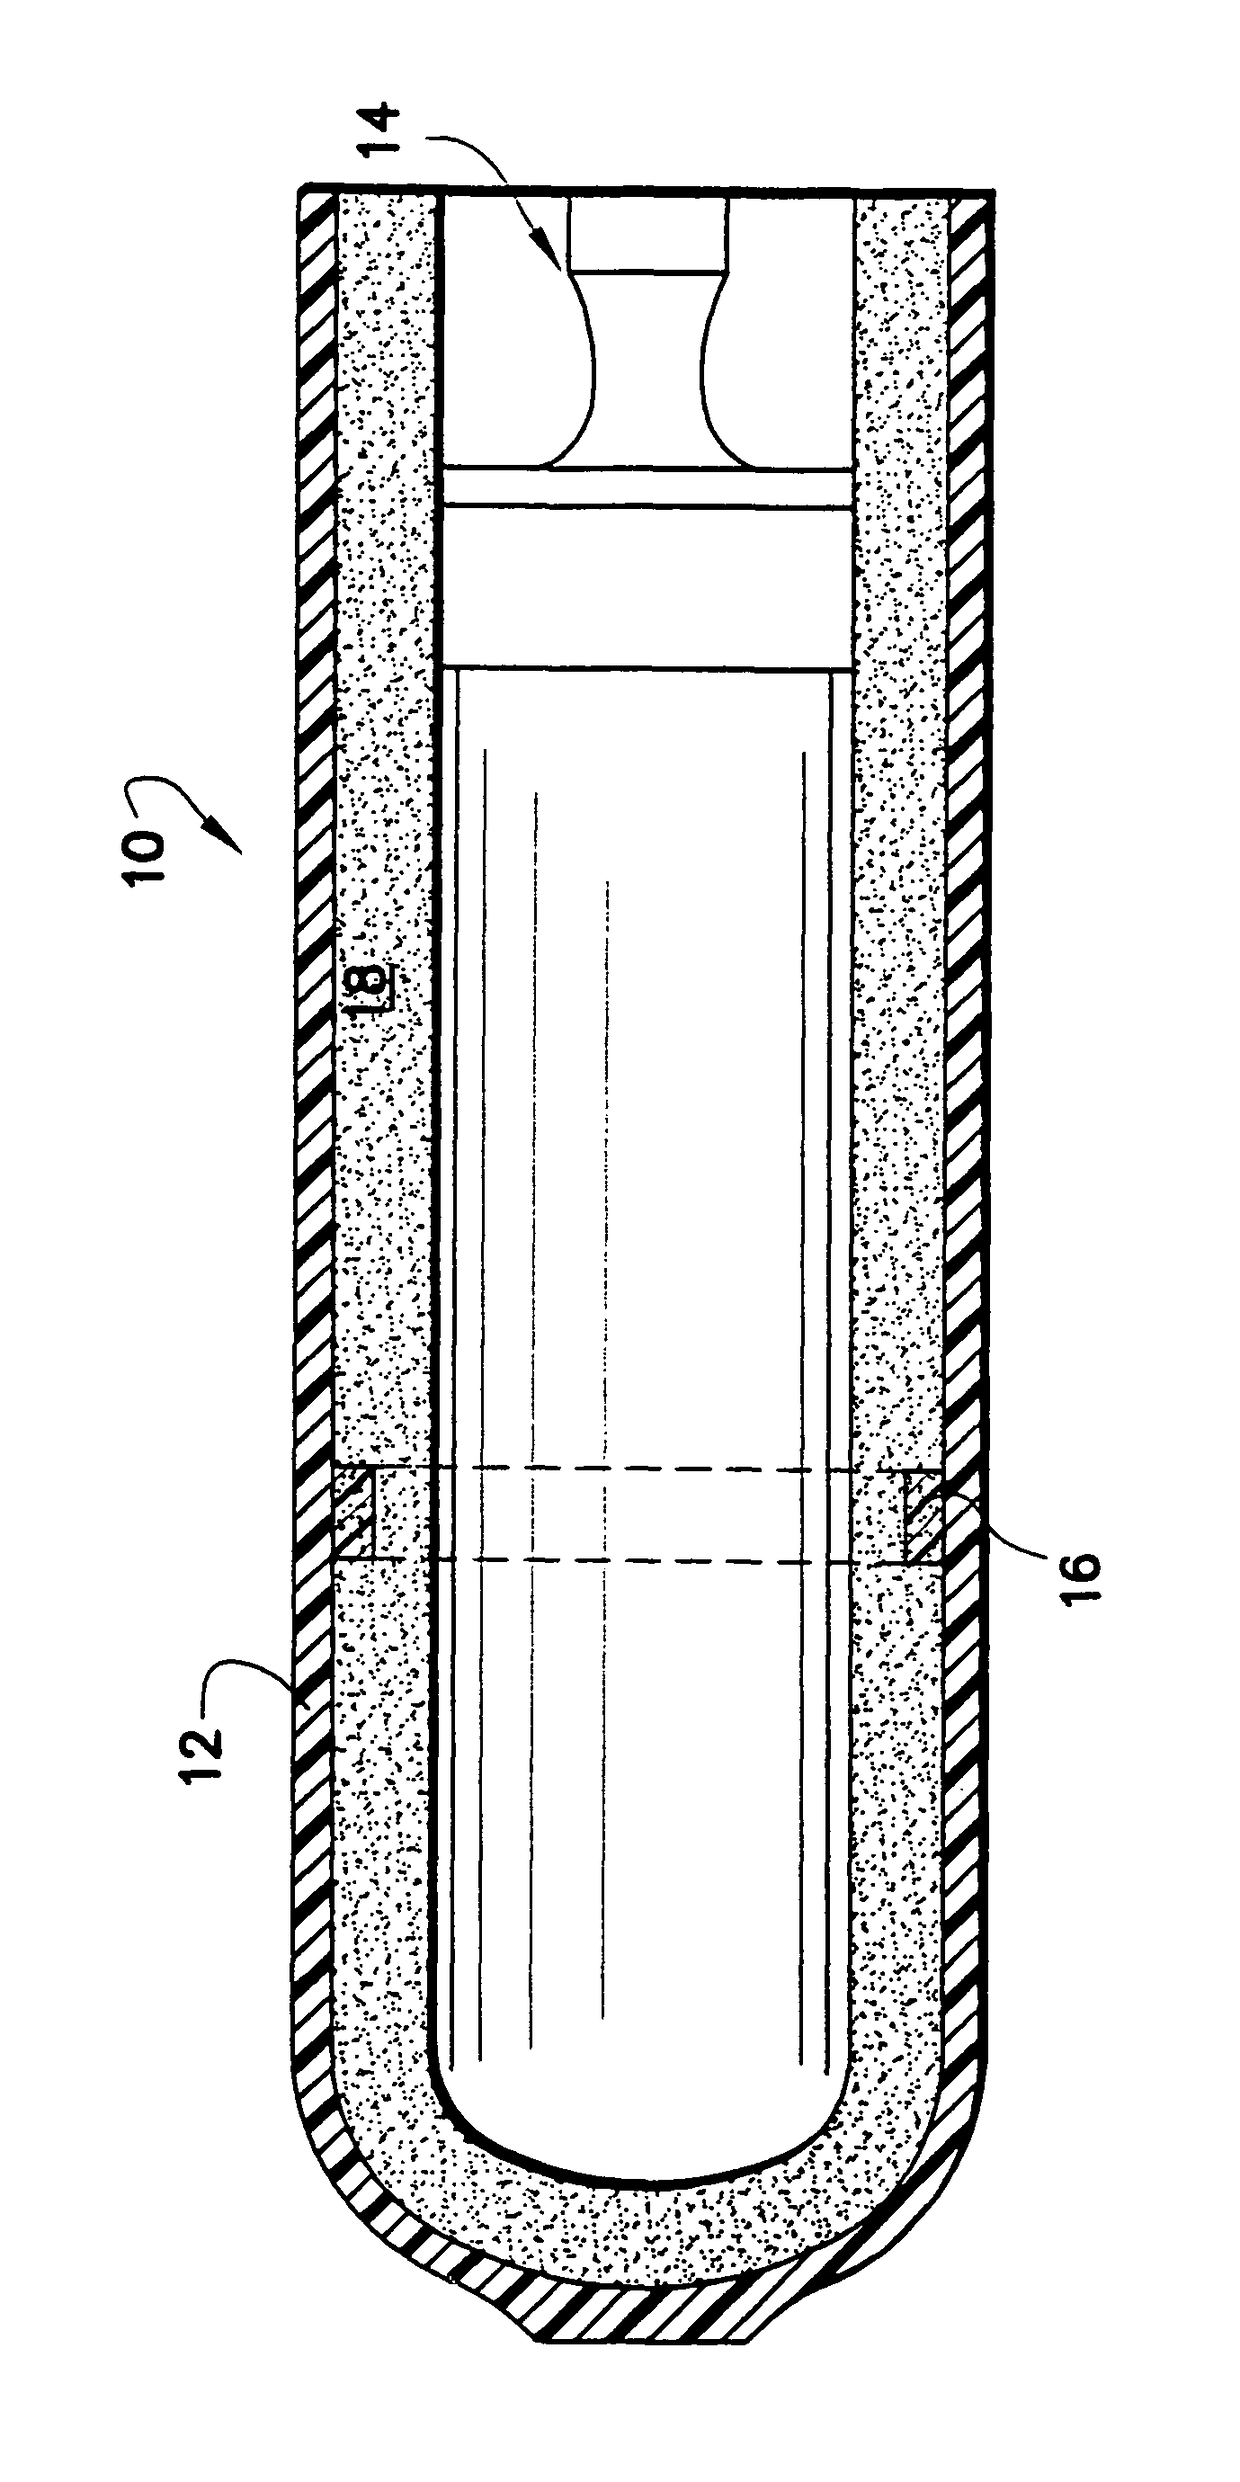 Rocket motors having controlled autoignition propellant systems